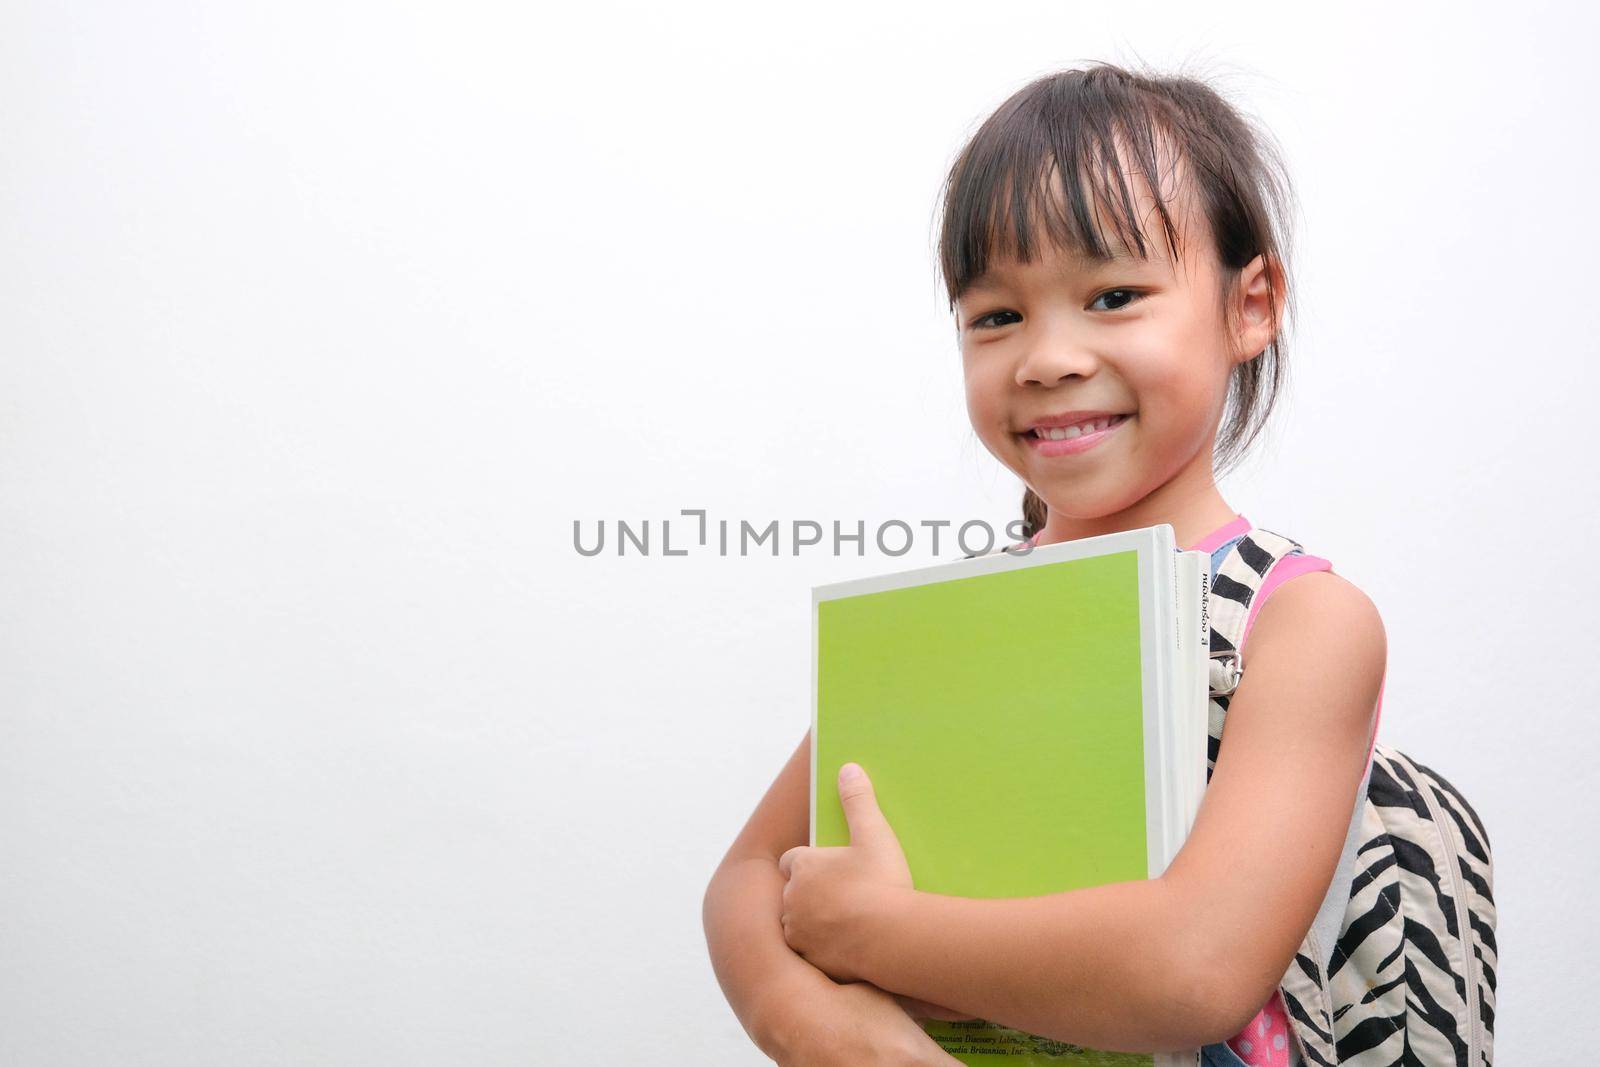 Back to school. Smiling little girl carrying a backpack holding books looking at the camera on a white background with copy space. Girl glad ready to study.